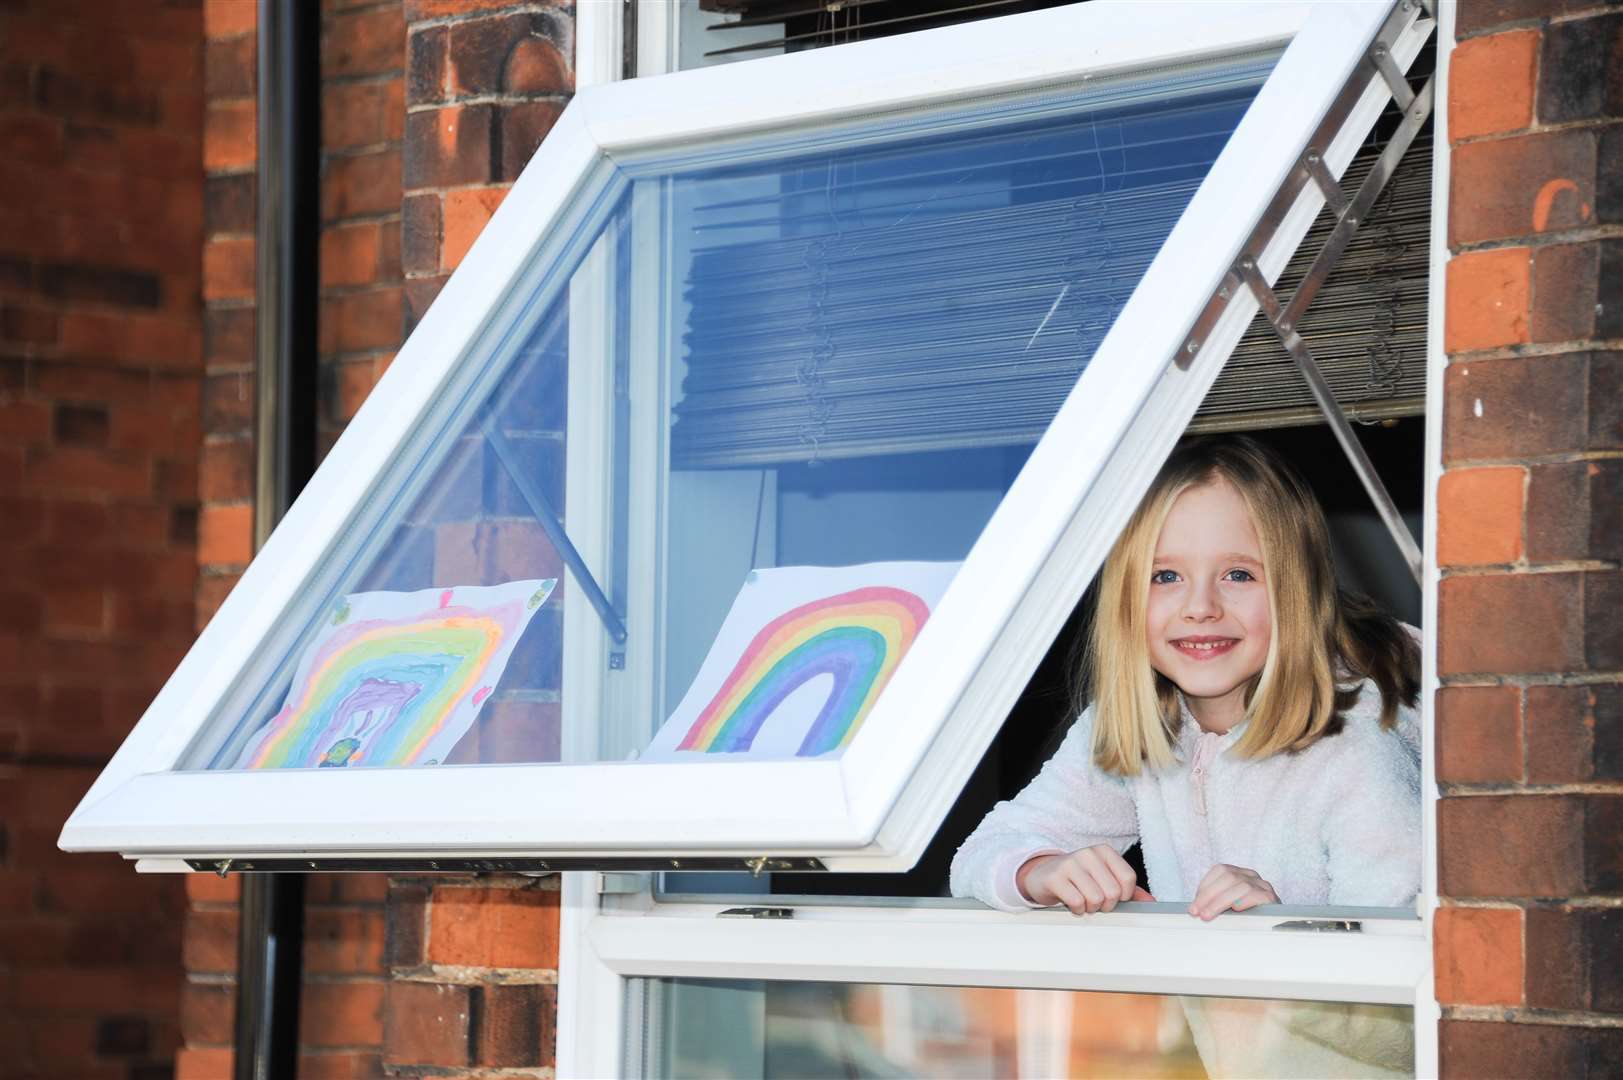 Rainbow drawing have become a symbol of hope during the coronavirus outbreak with children designing pictures for their windows